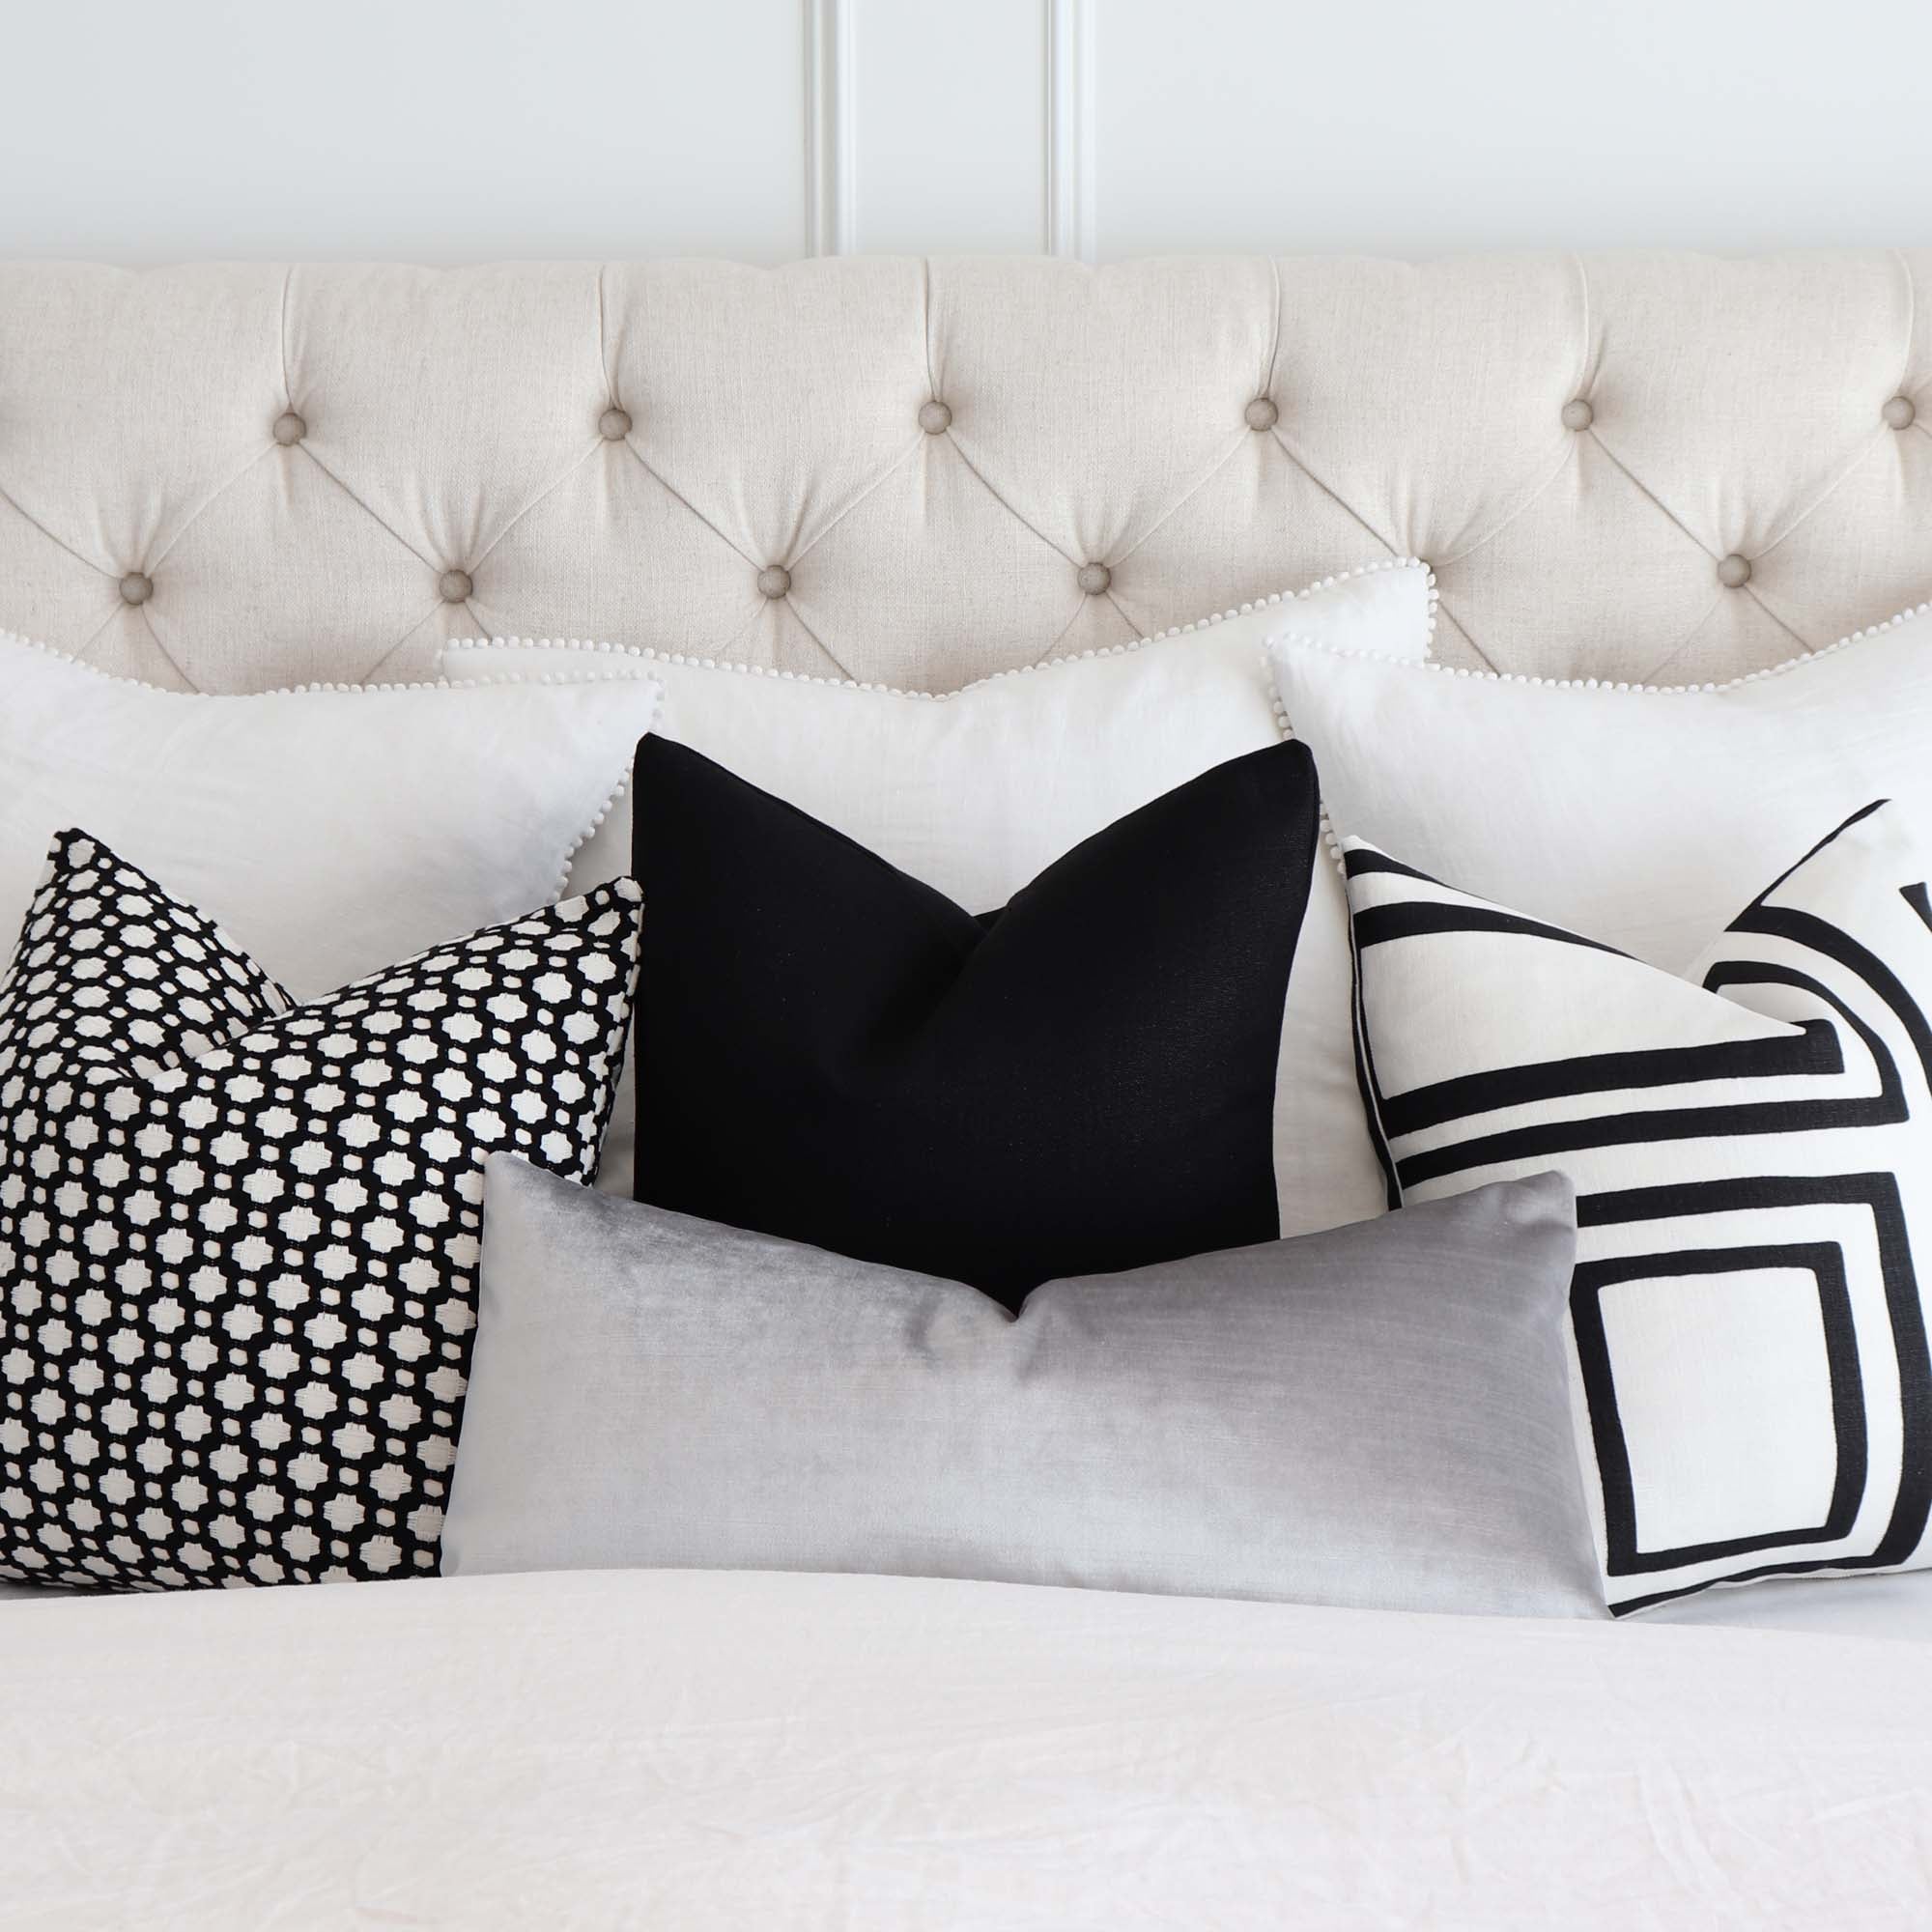 Throw Pillows: Decorative Pillows & Pillow Covers to Freshen Up Any Room